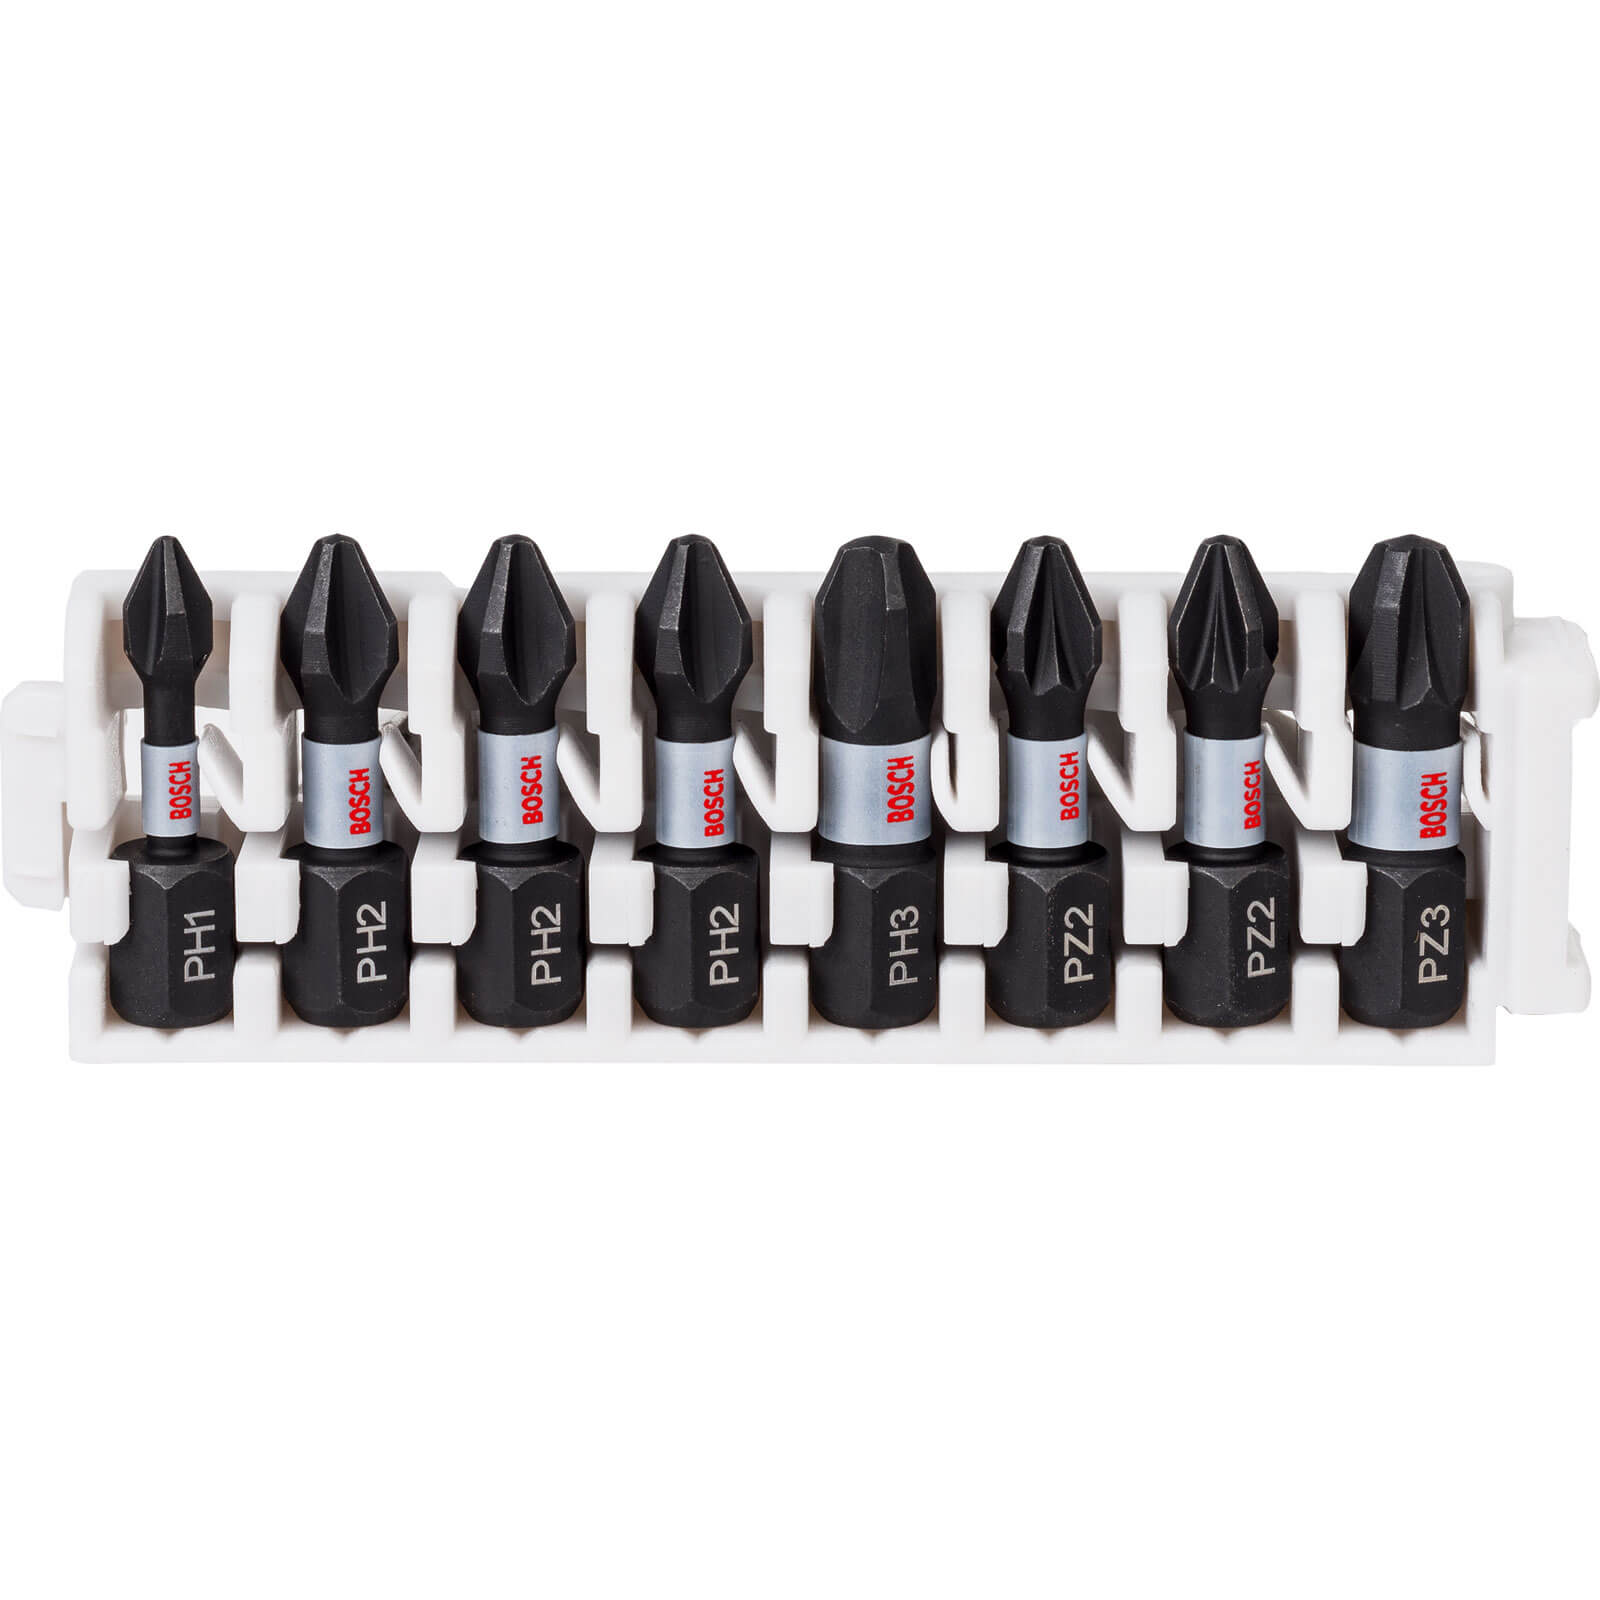 Image of Bosch 8 Piece Impact Control Phillips and Pozi Screwdriver Bit Set